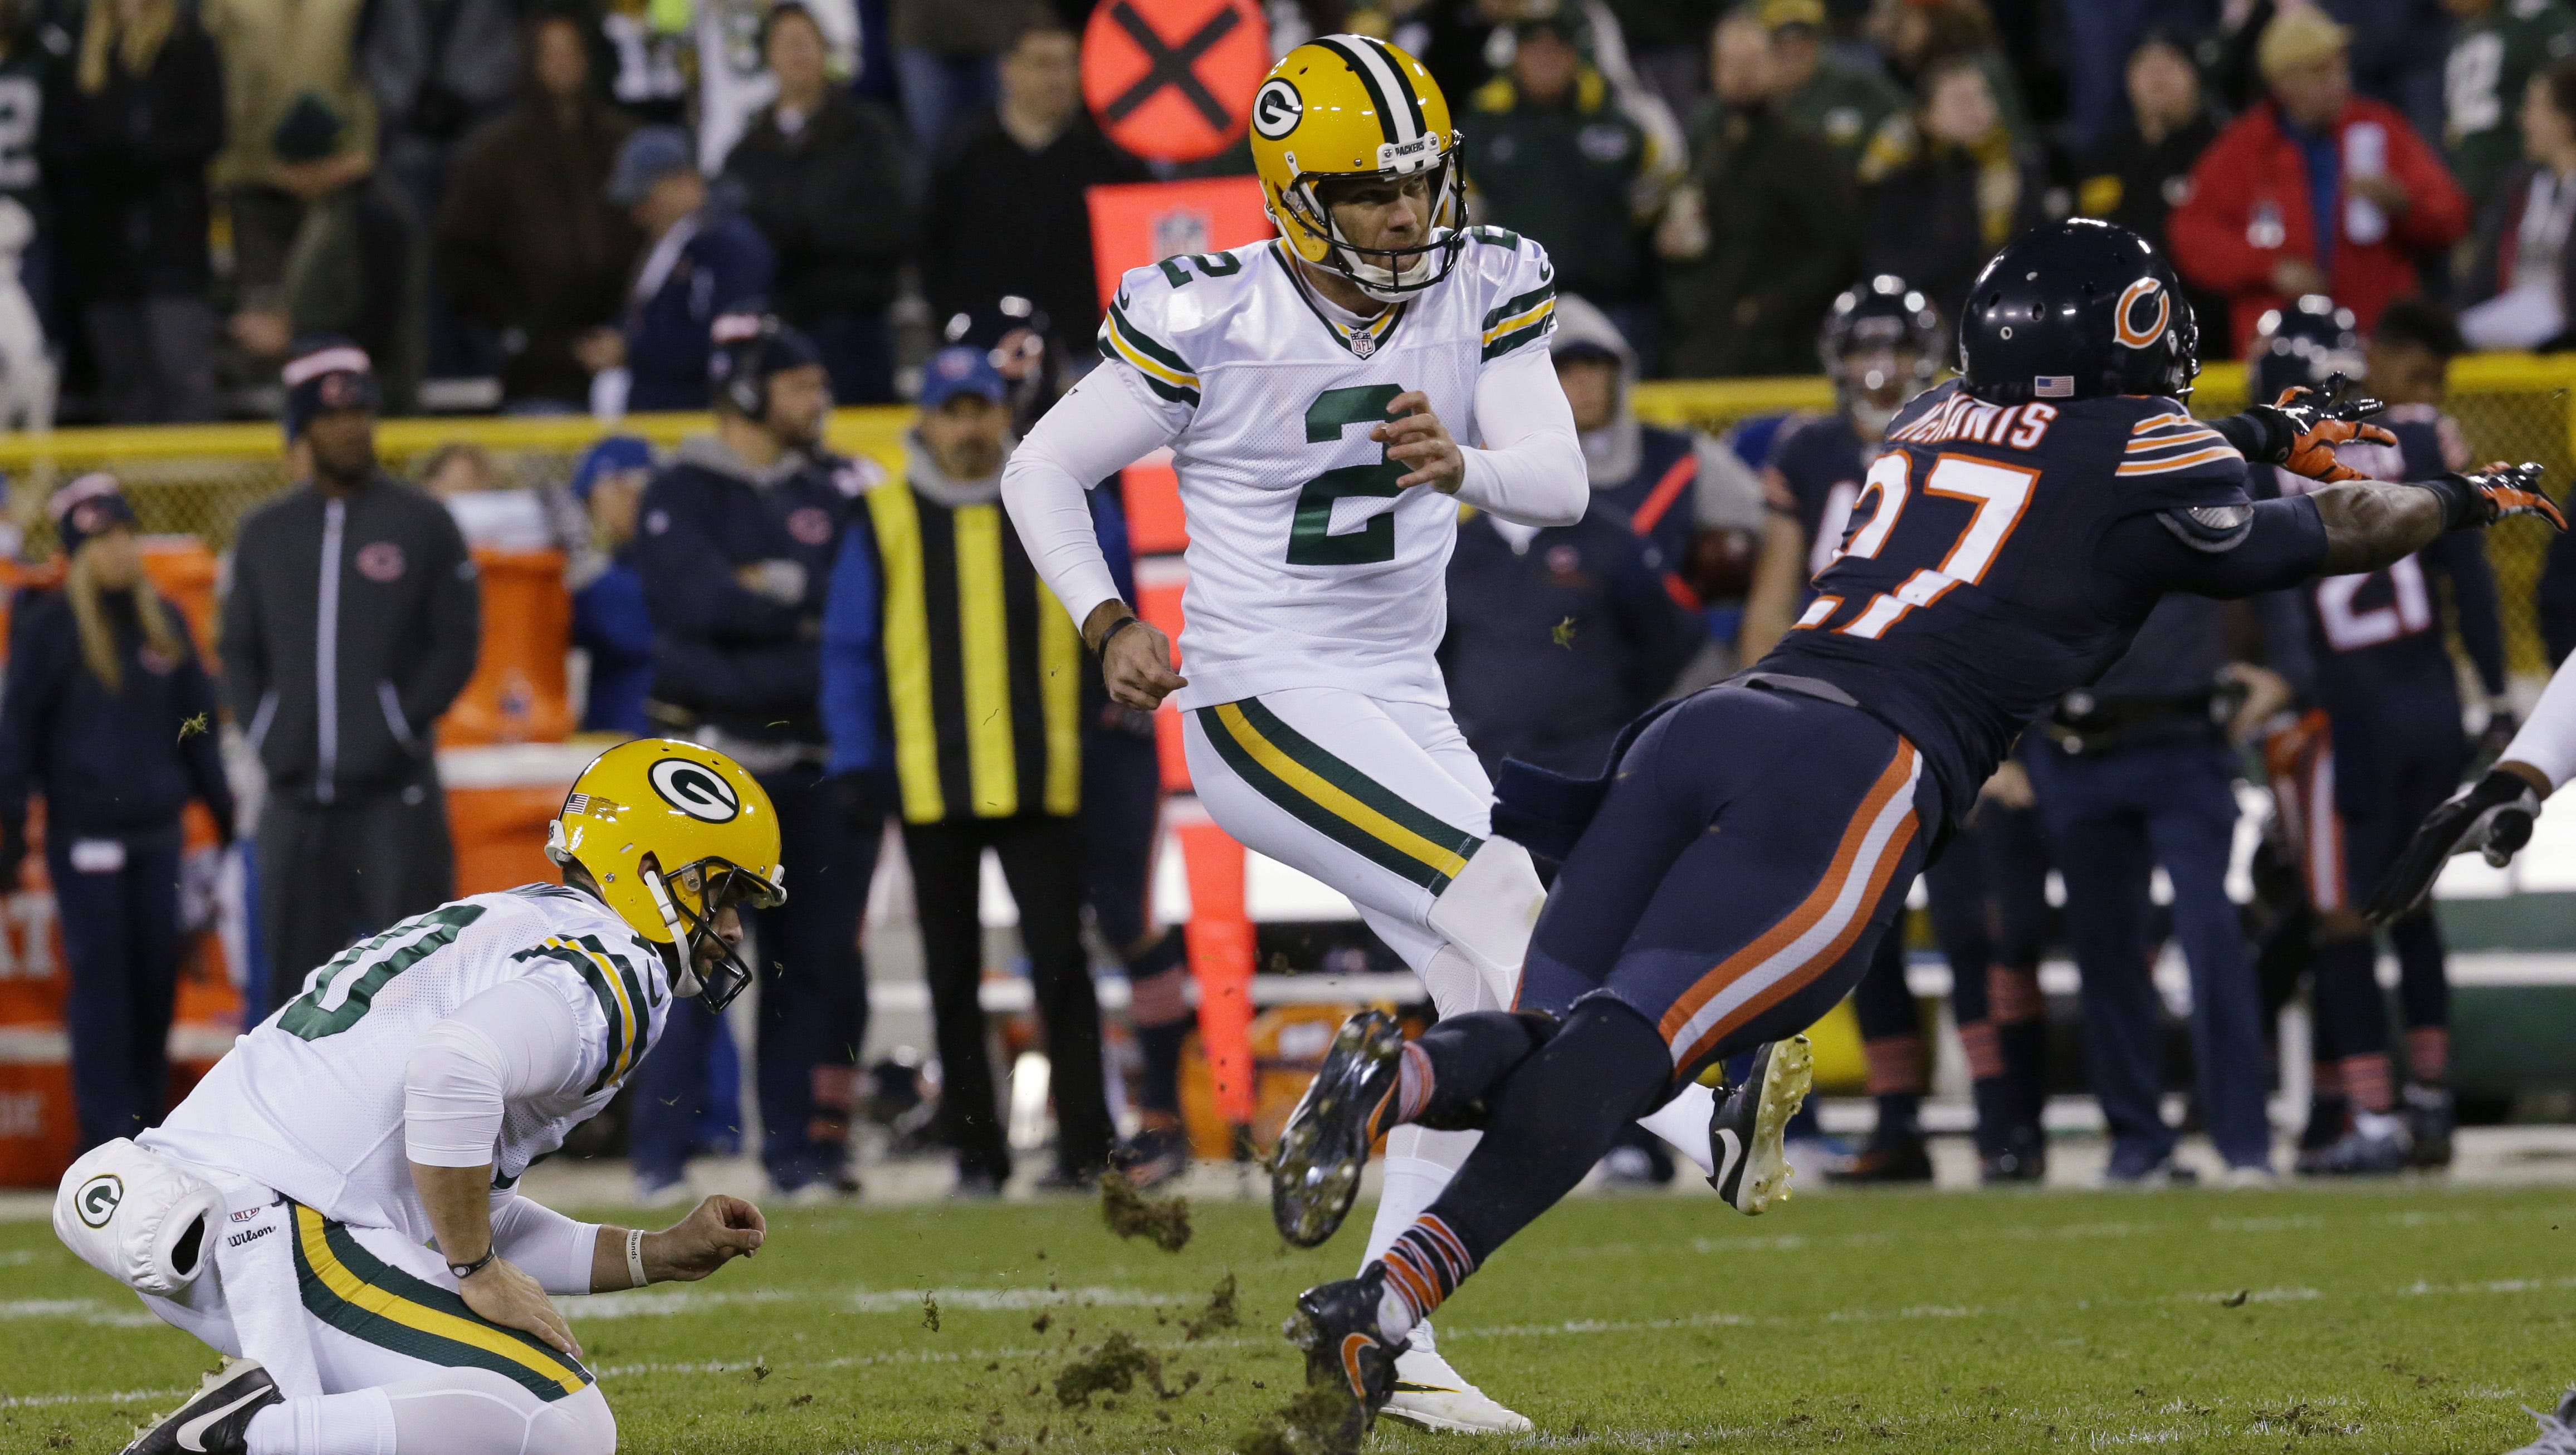 Green Bay Packers kicker Mason Crosby (2) watches his field goal attempt blocked during the fourth quarter against the Chicago Bears on Oct. 20, 2016, at Lambeau Field.